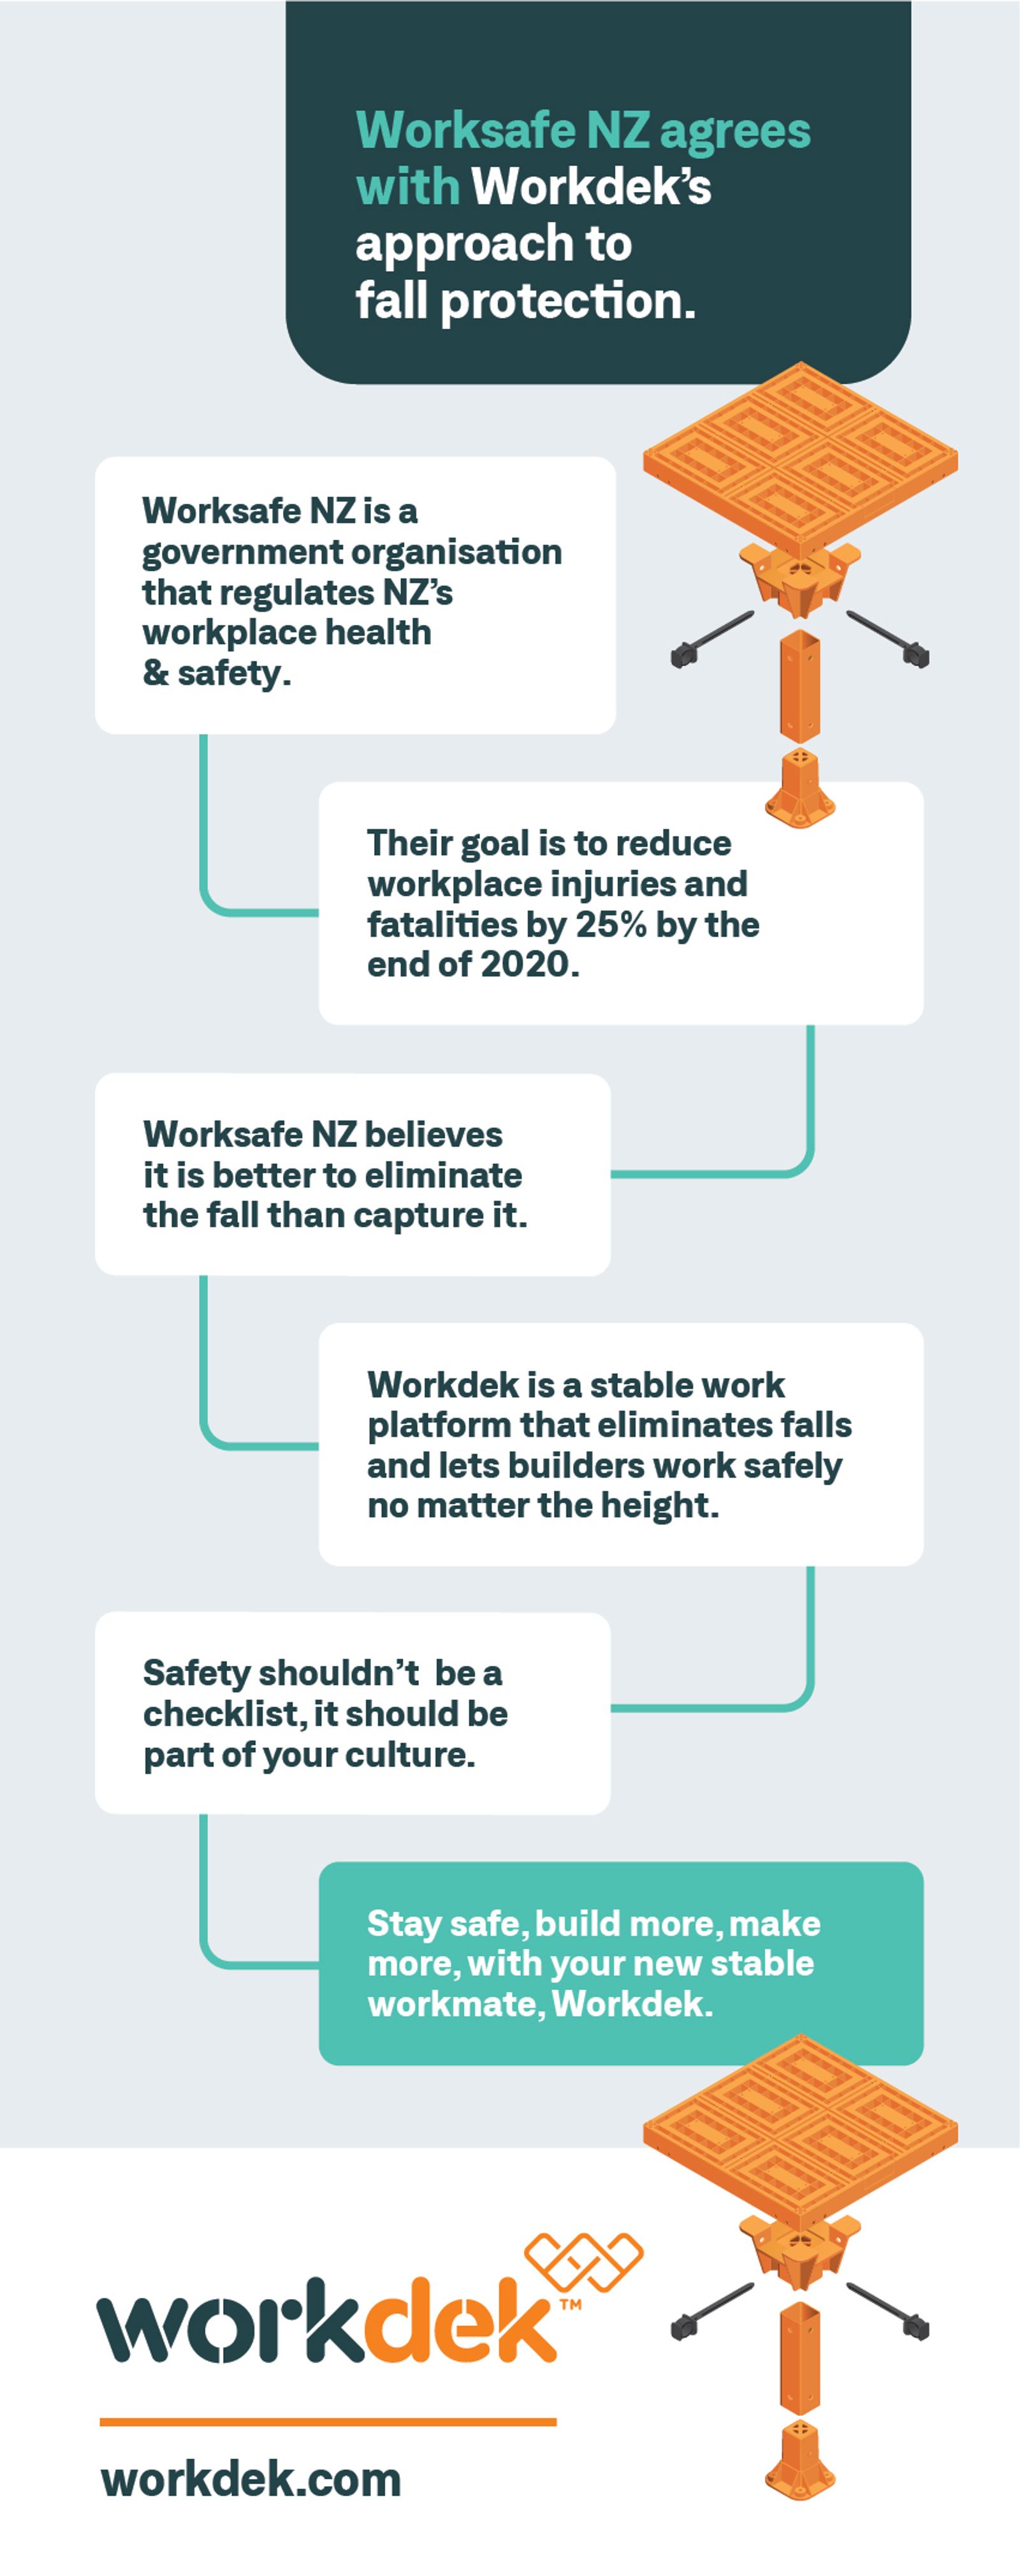 Worksafe NZ agrees with Workdek's approach to fall protection